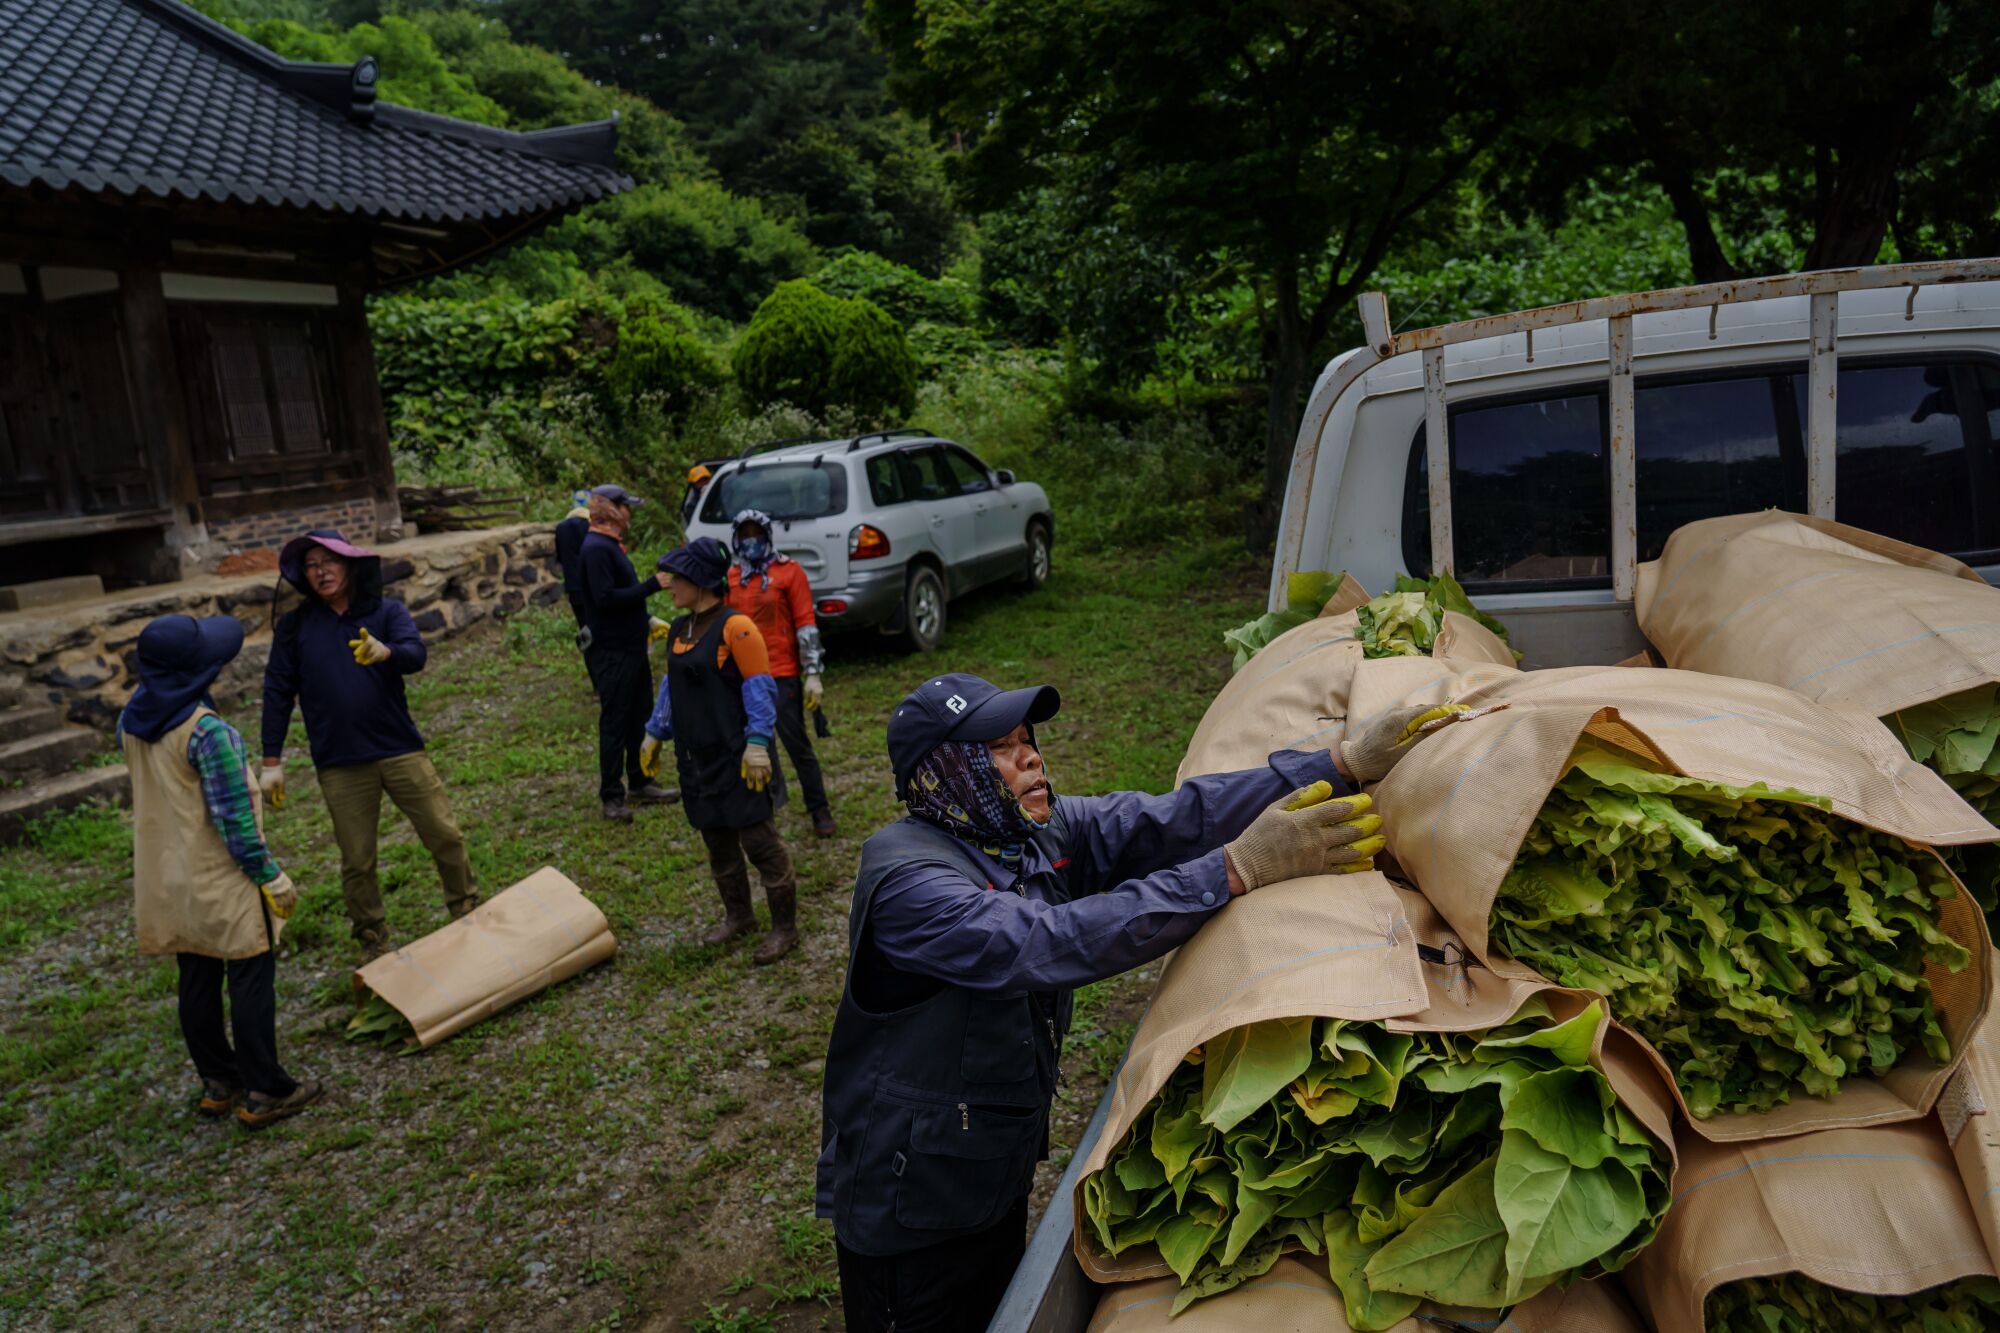 Natawat Tongratoke heaves bales of tobacco leaves onto a truck bed at a farm in in Bokheung-Myeon, South Korea.